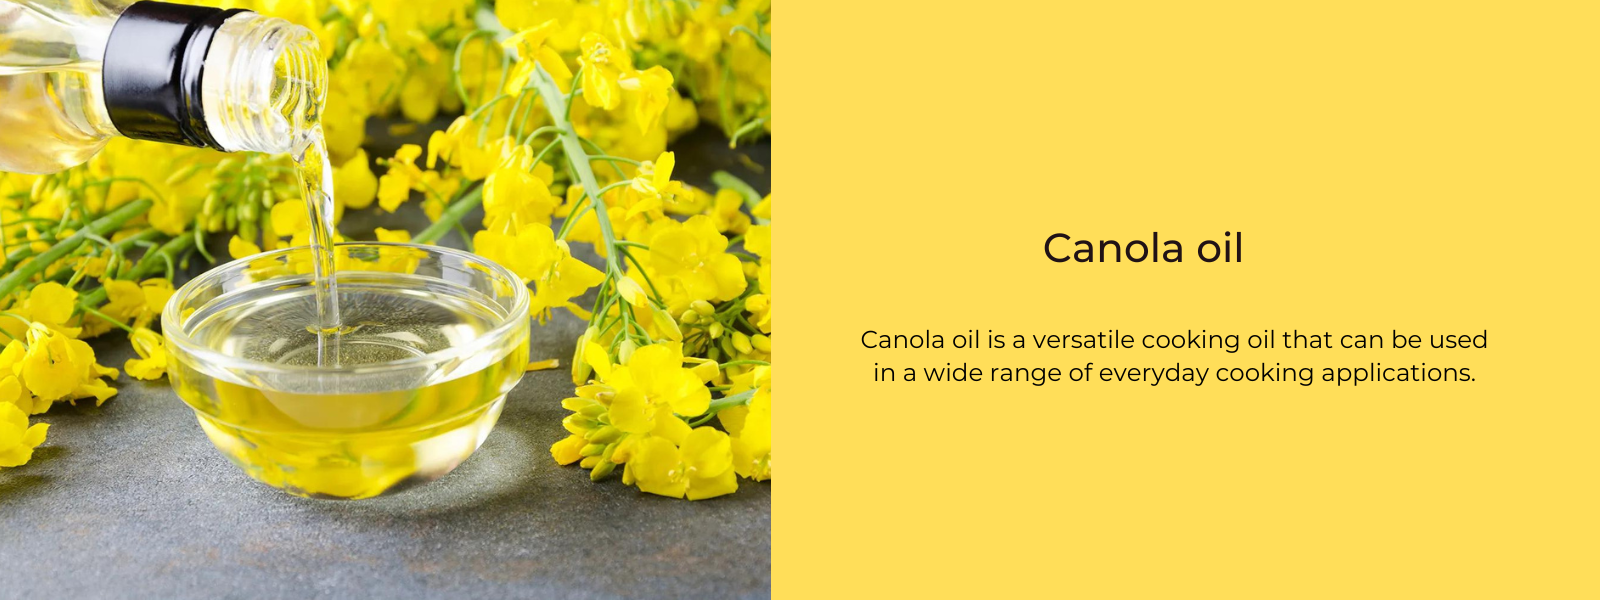 Canola oil - Health Benefits, Uses and Important Facts